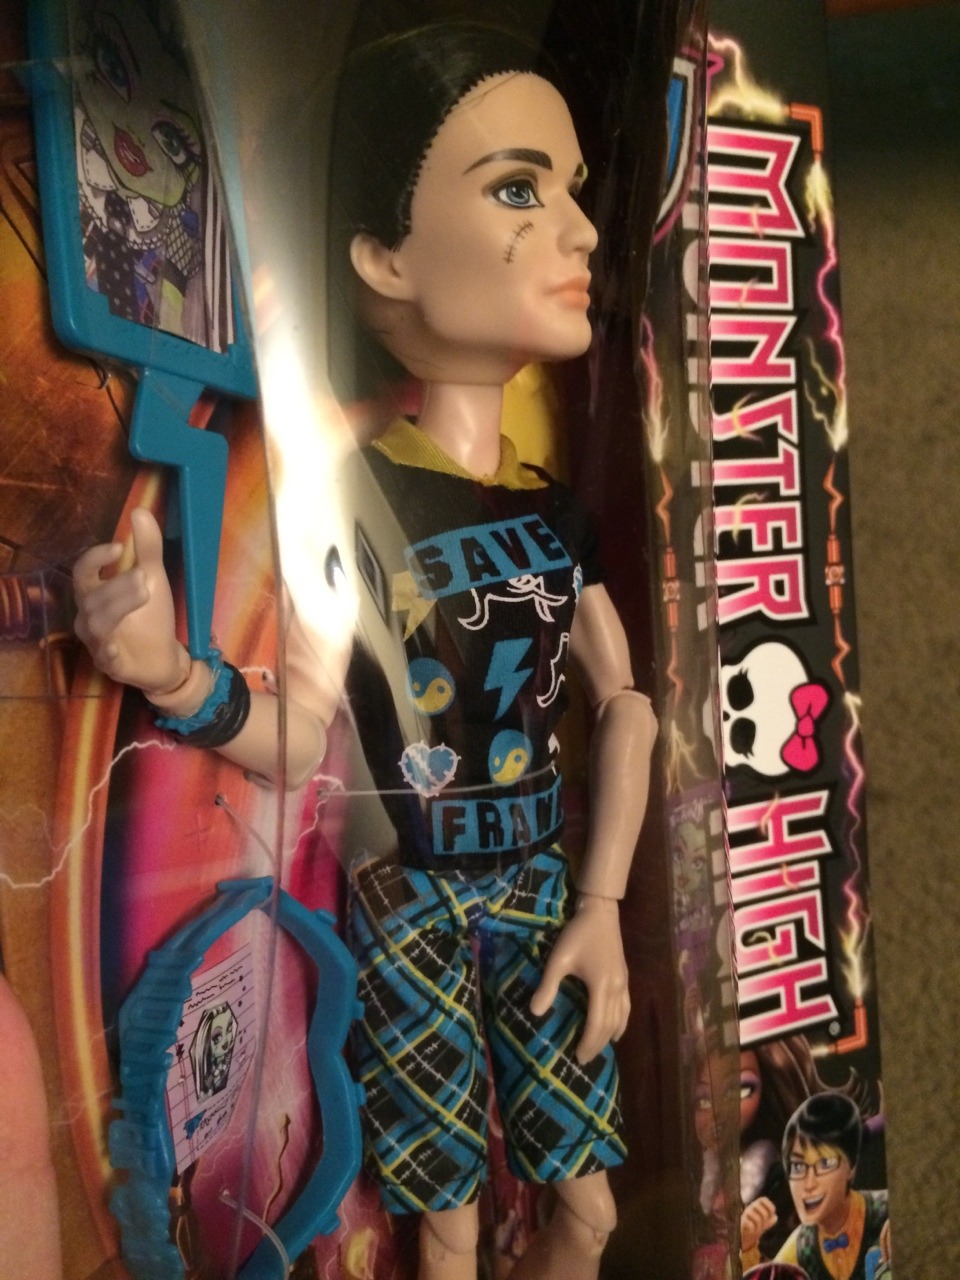 confessionsofamonsterhighaddict:

NEW FREAKY FUSION LINE

FOUND IN K-MART AUSTRALIA

LINE IS CALLED SAVE FRANKIE

CONSISTS OF DRACULAURA, CLAWDEEN AND JACKSON

PICTURED JACKSON JEKYLL